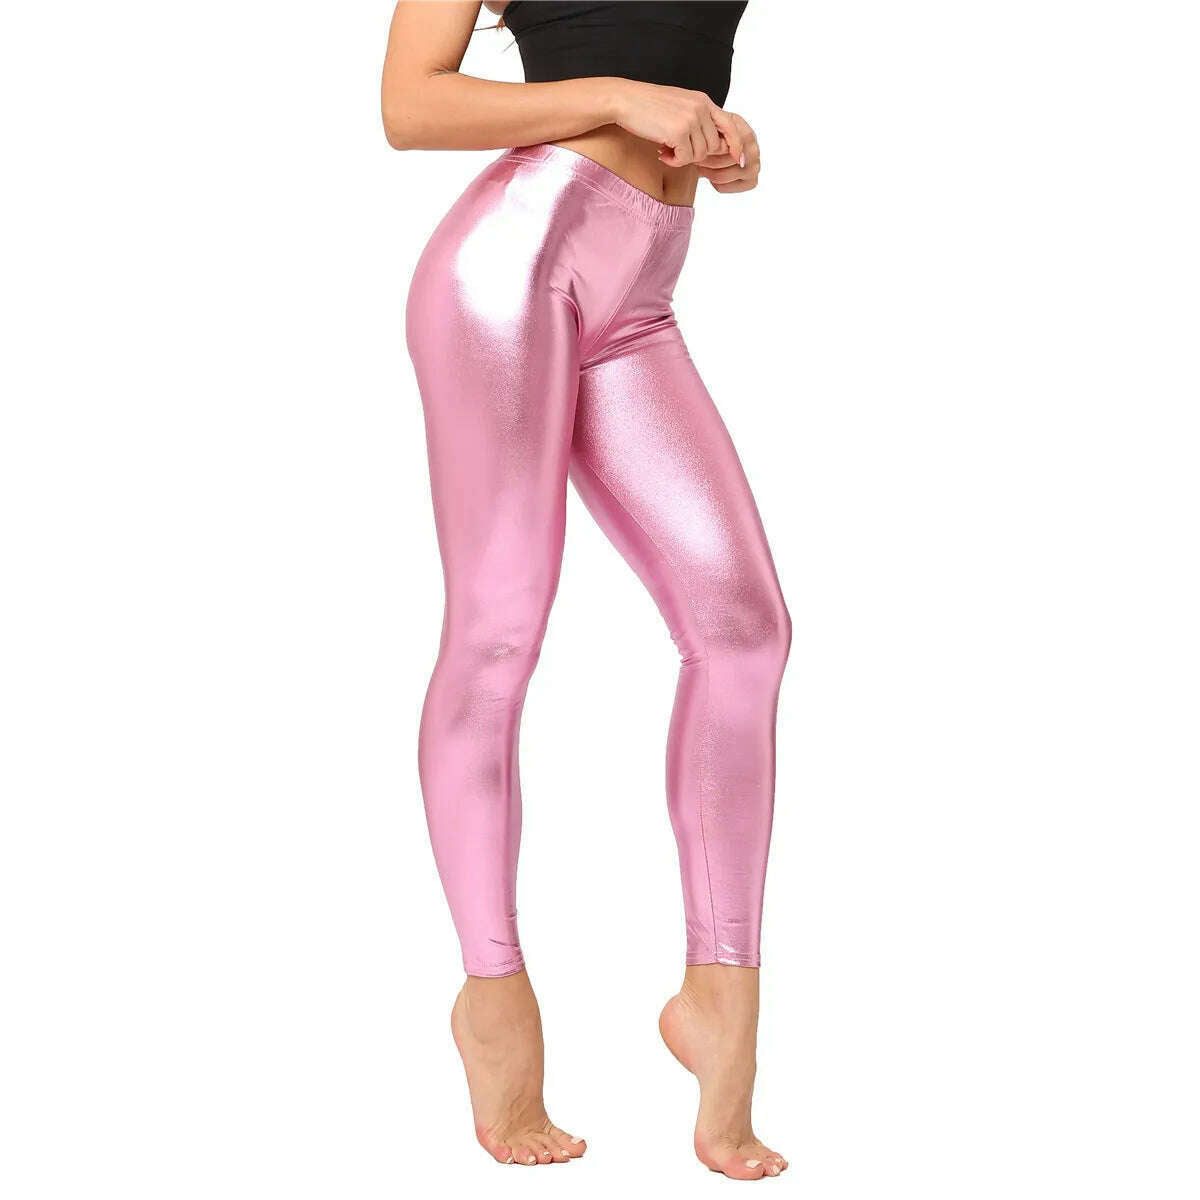 KIMLUD, Metallic Color PU Leggings Women Faux Leather Pants Dancing Party Pant Sexy Night Club Skinny Costume Pants Tight Trousers, Pink / One size 50kg below, KIMLUD Womens Clothes